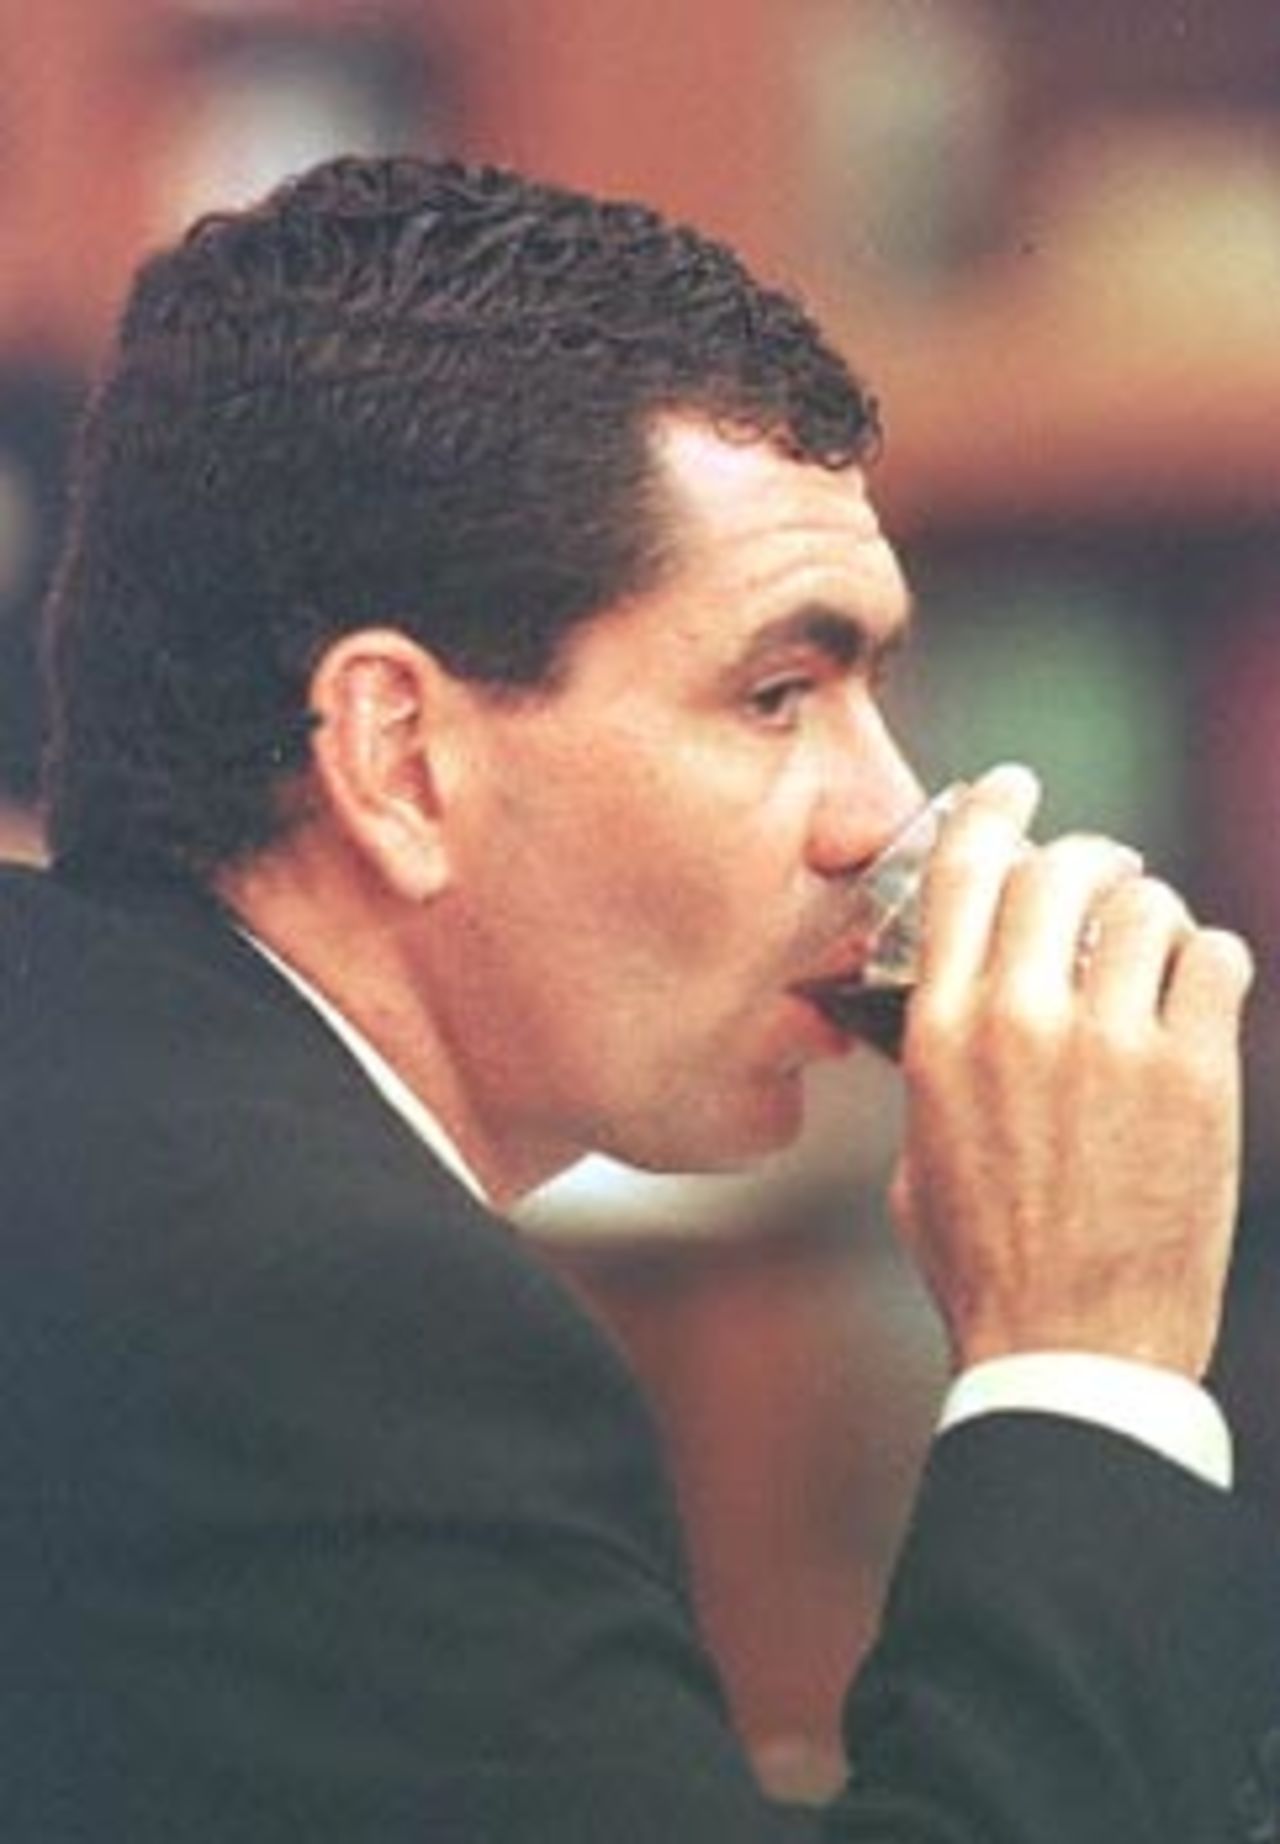 Sacked South African cricket captain Hansie Cronje drinks a glass of water during his cross-examination at the King Commission of Inquiry into allegations of cricket match-fixing in Cape Town 22 June 2000. Cronje refused to name players who might have been in favour of accepting a 200,000 dollars bribe in 1996 to throw a one-day international in India.